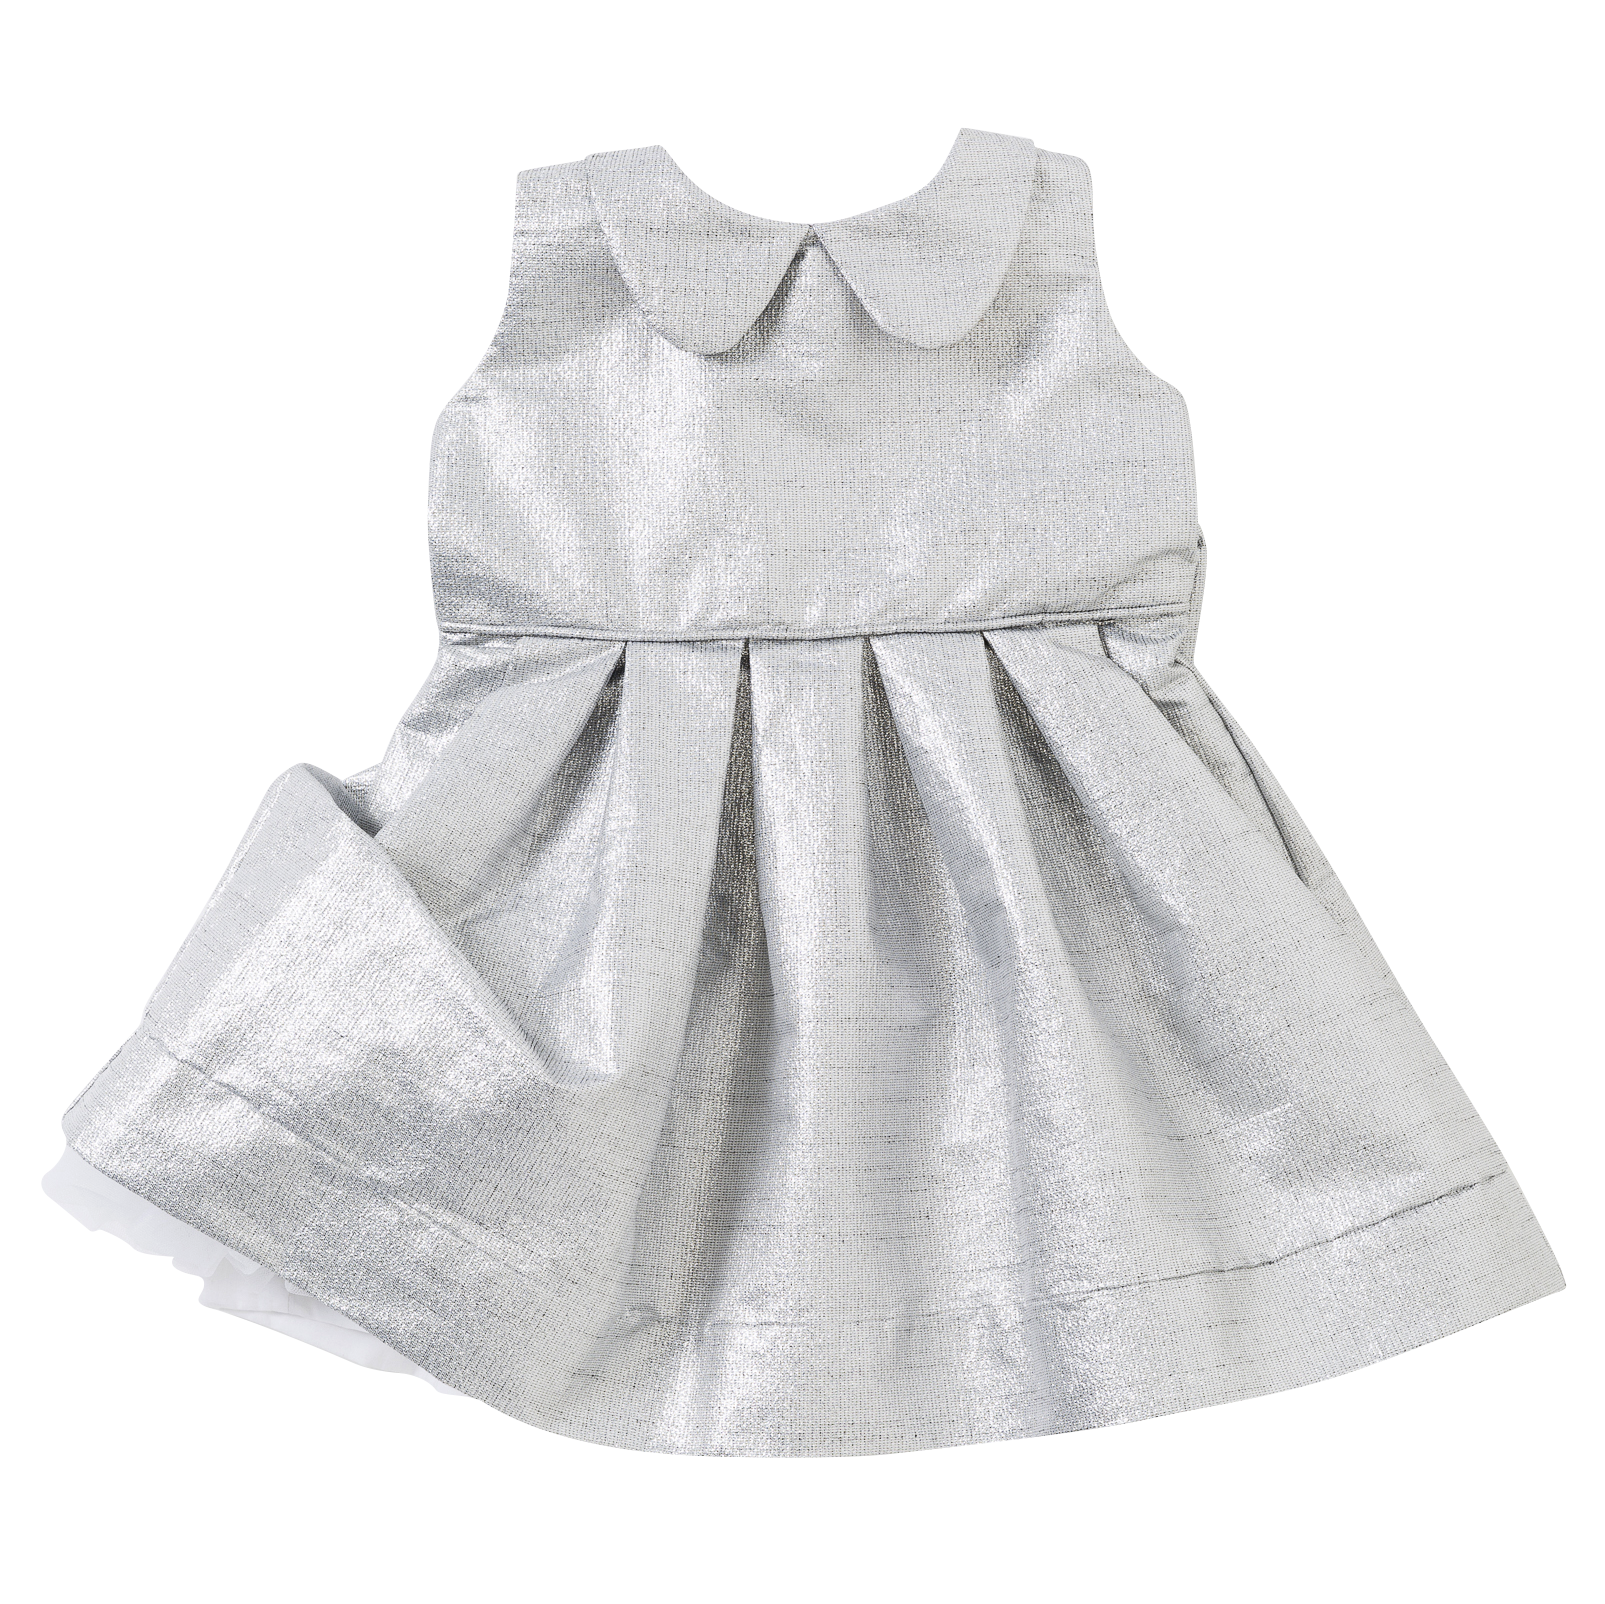 The Peter Pan Dress in Silver